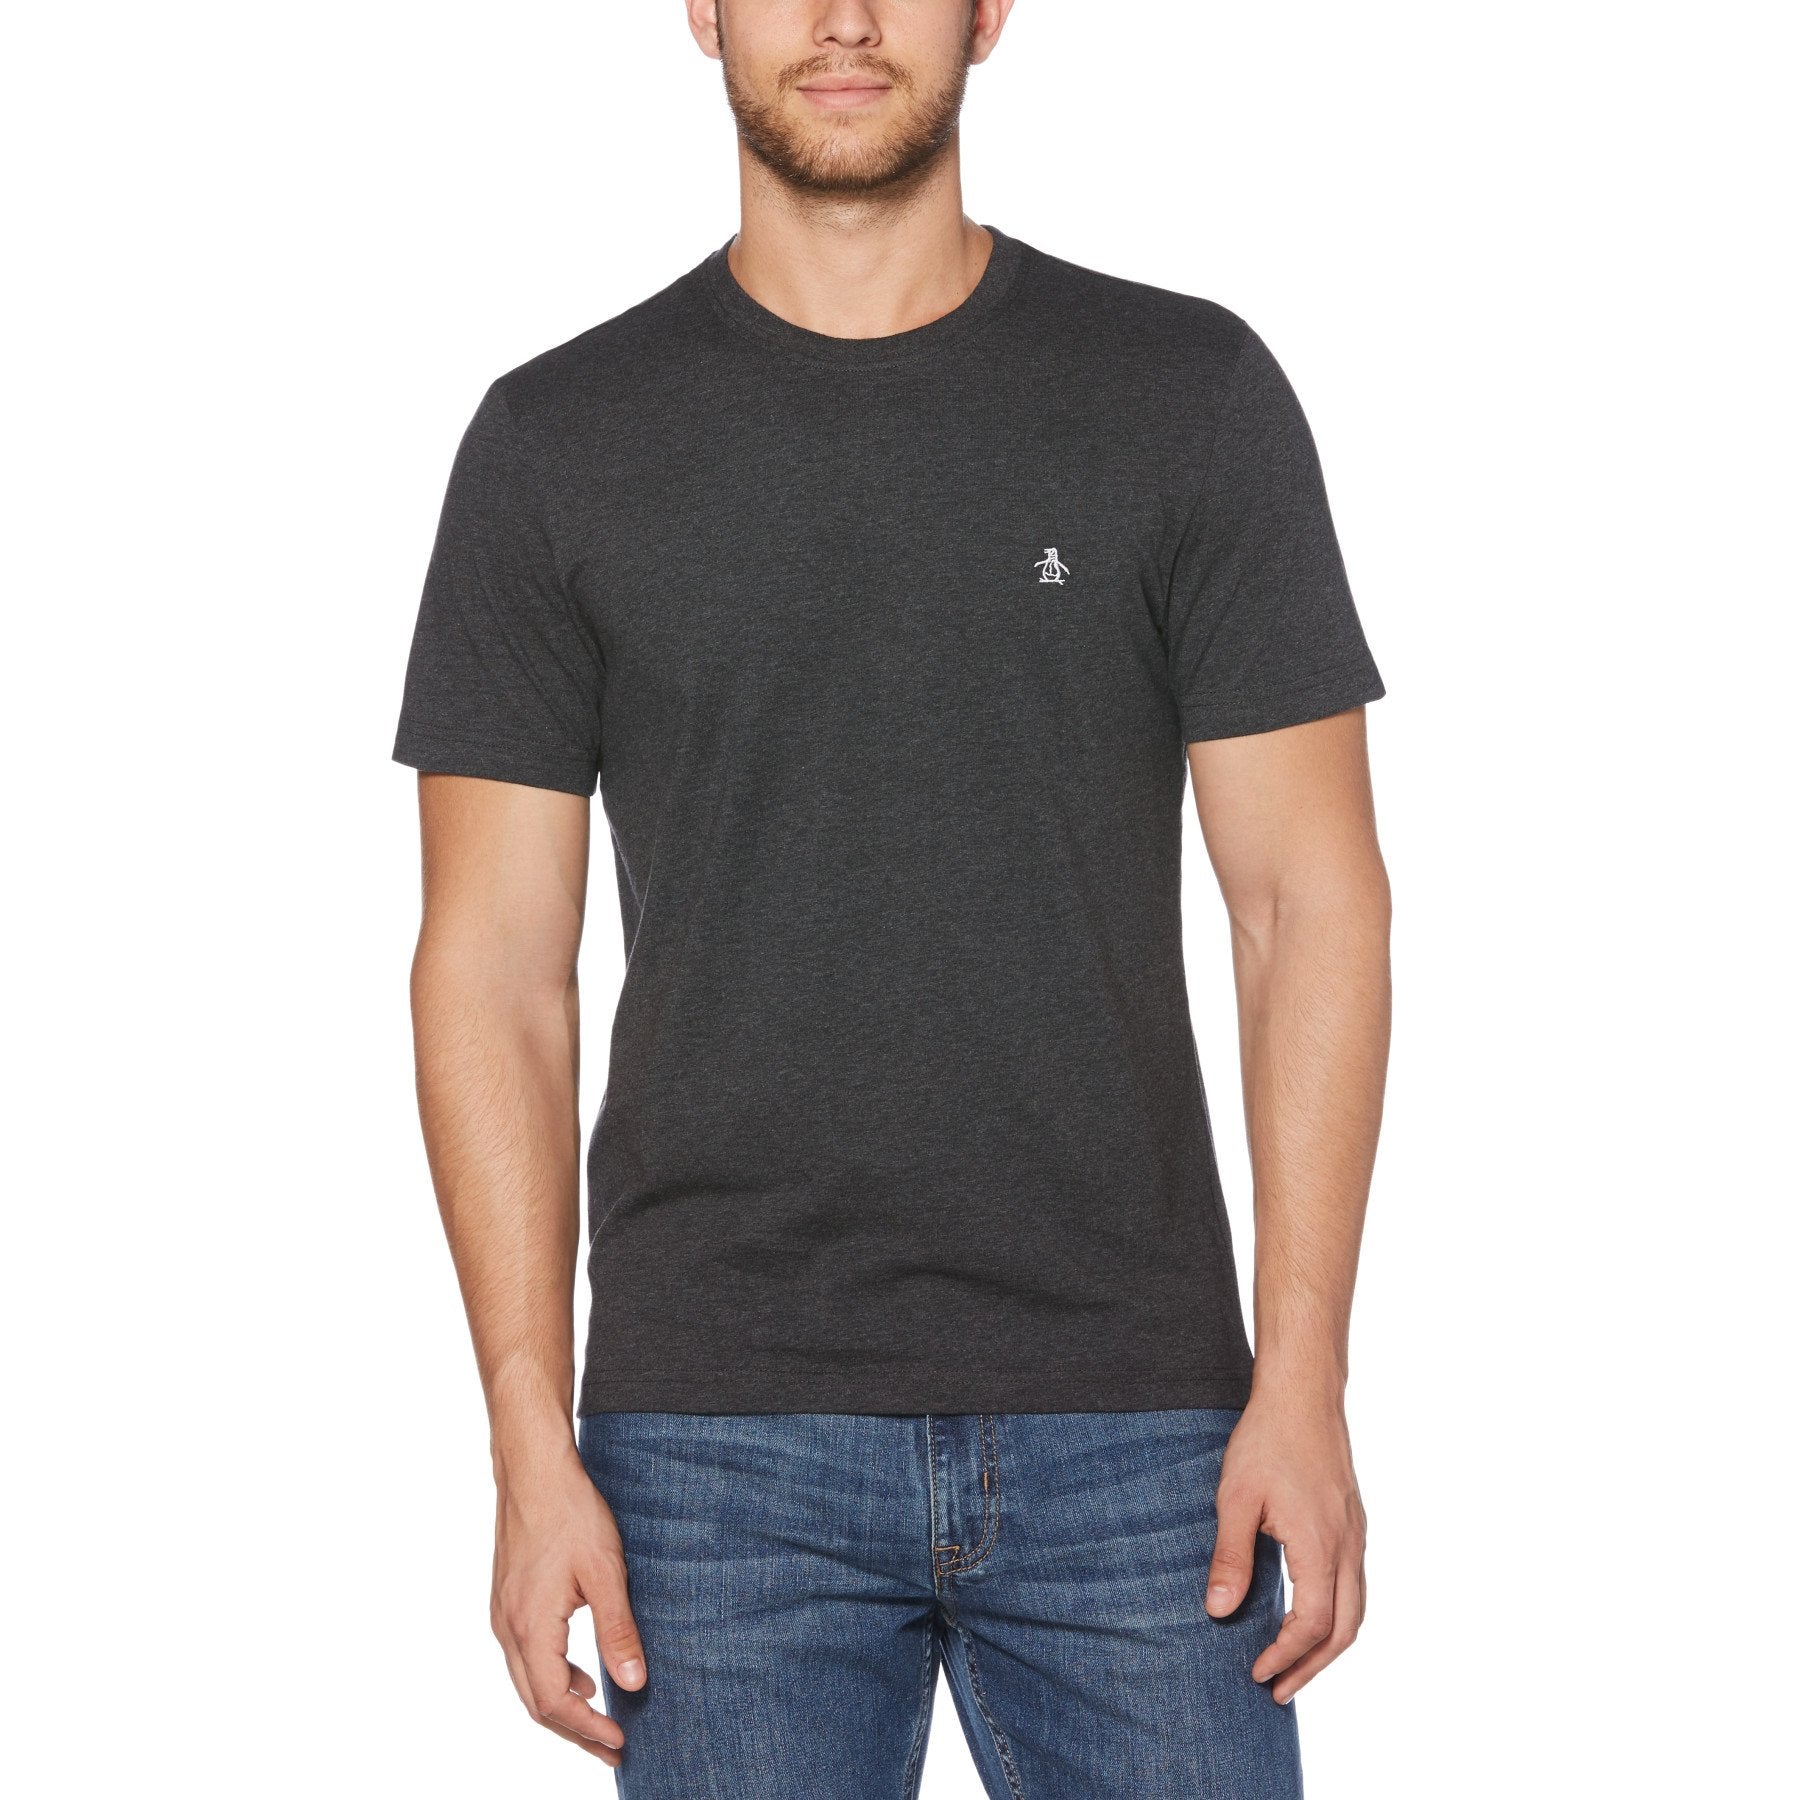 View Pin Point Embroidered Logo Organic Cotton TShirt In Dark Charcoal Hea information